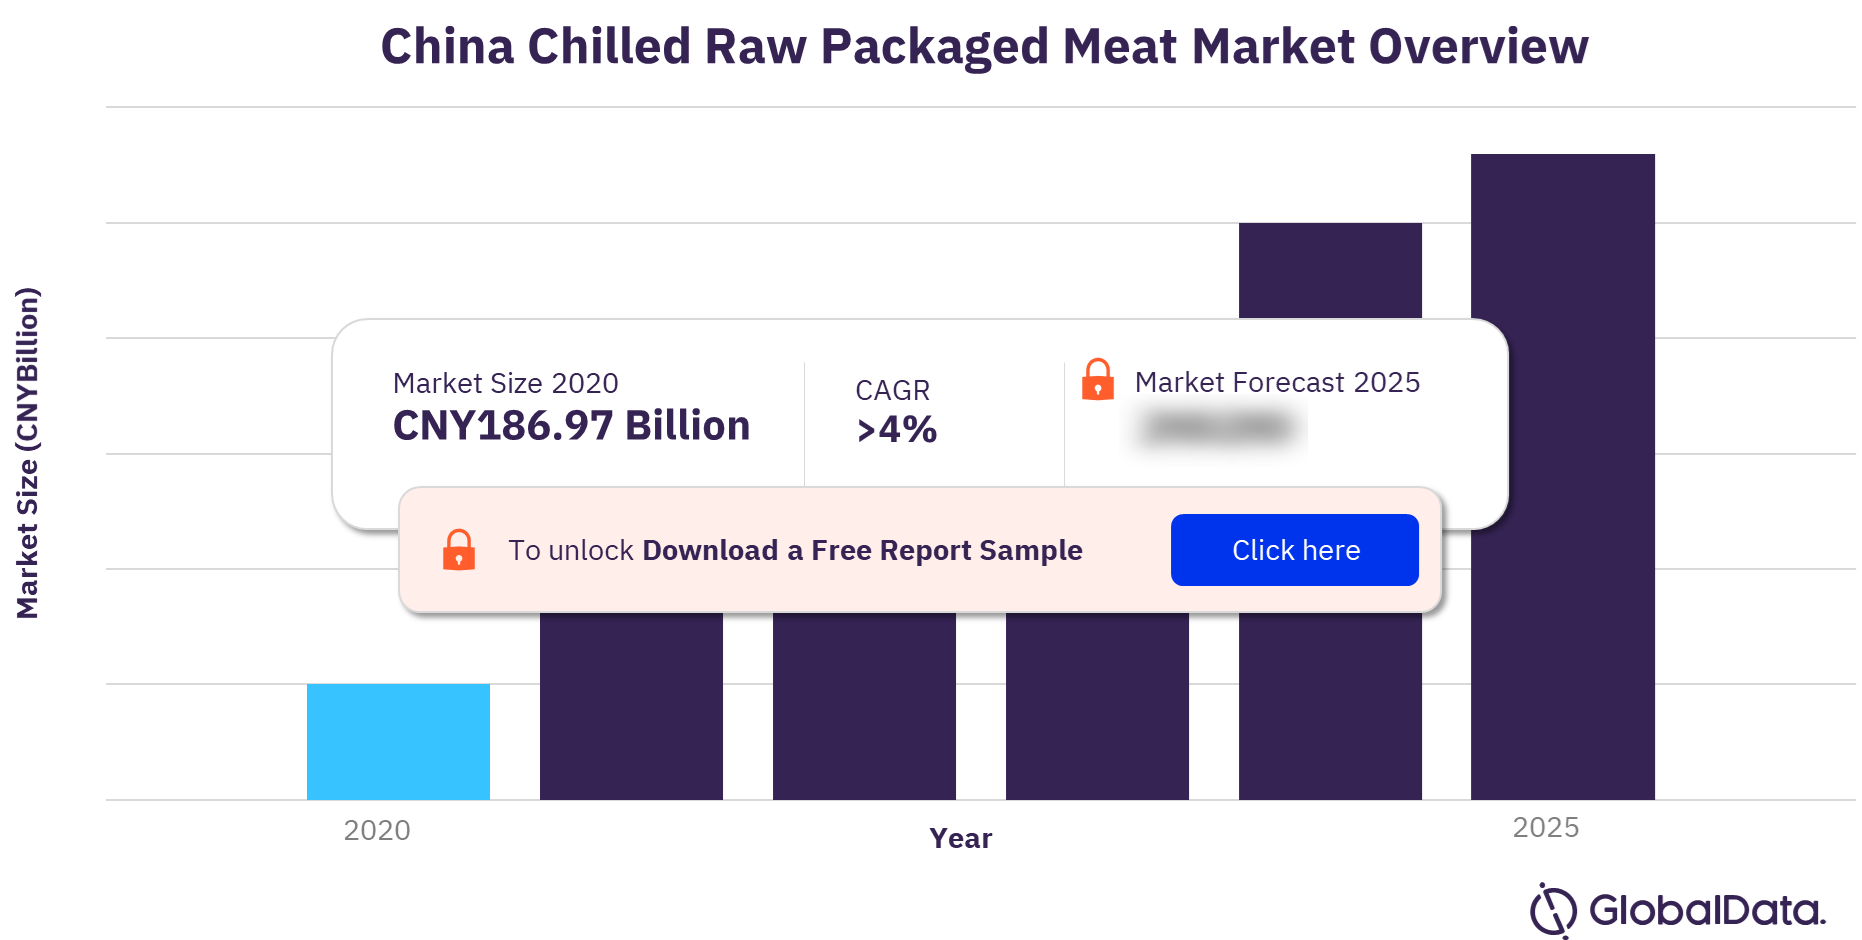 China chilled raw packaged meat market outlook